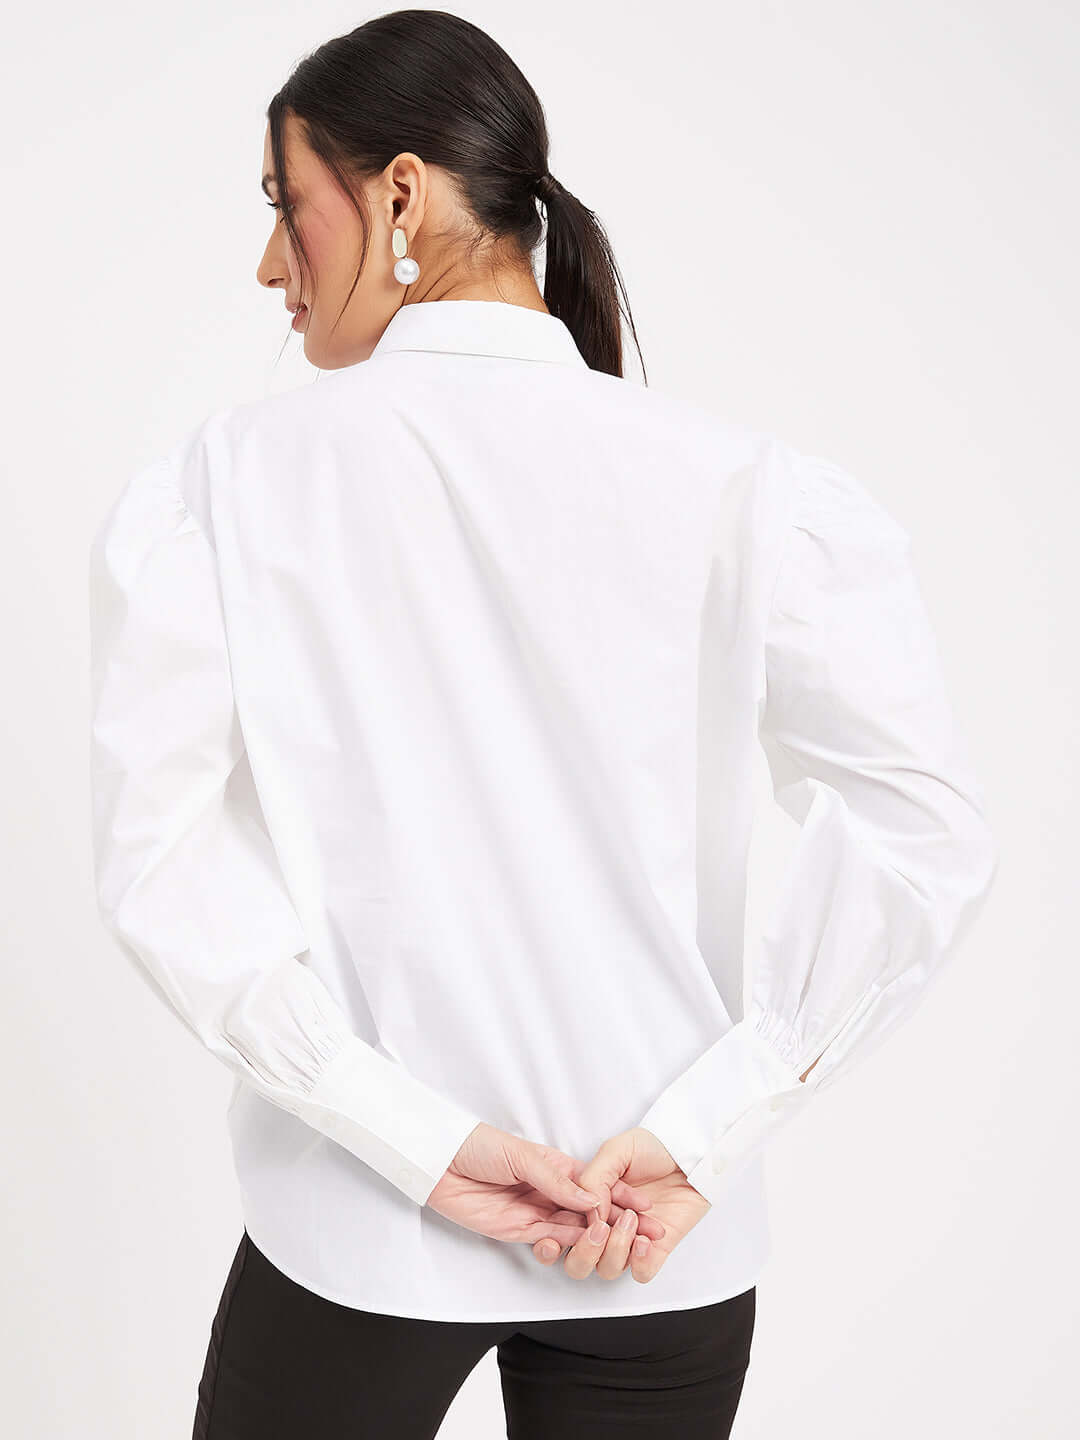 White Cotton Shirt With Black Thread Rich Embroidered Collared Shirt